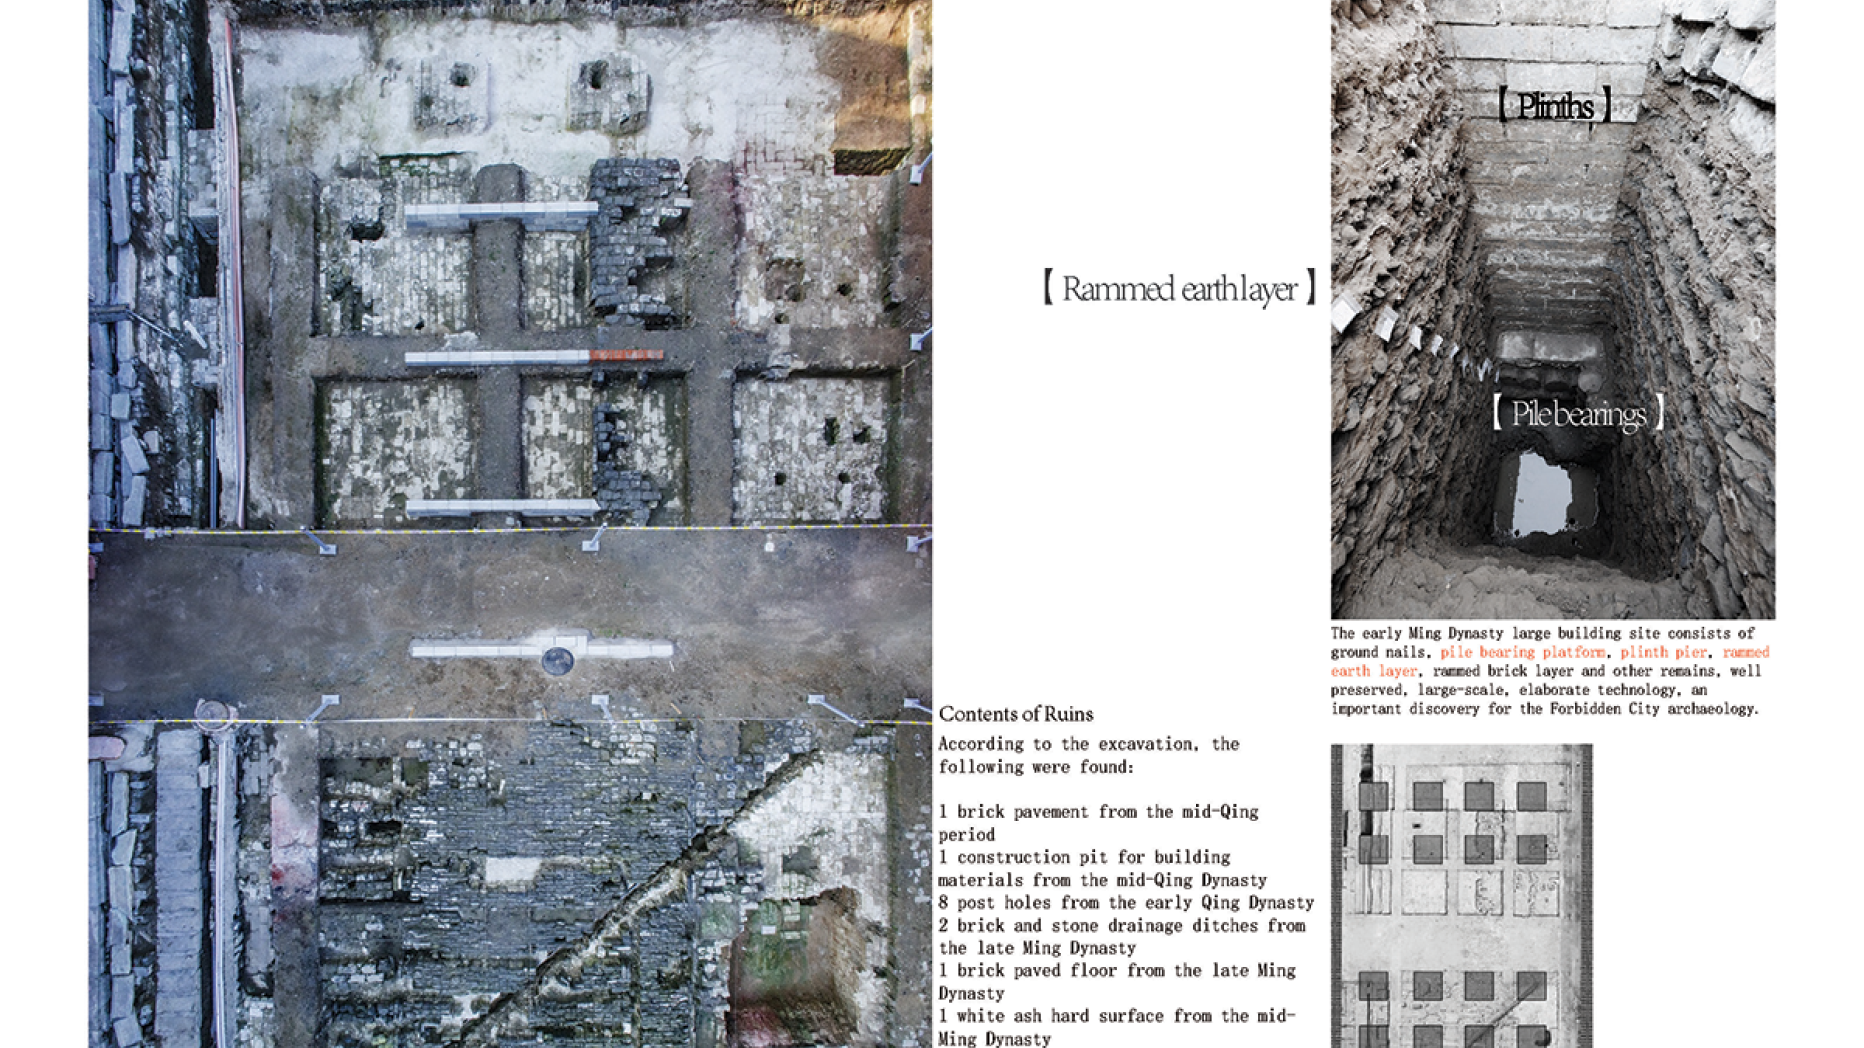 Photographs of Current Conditions of the Remains and Ruins